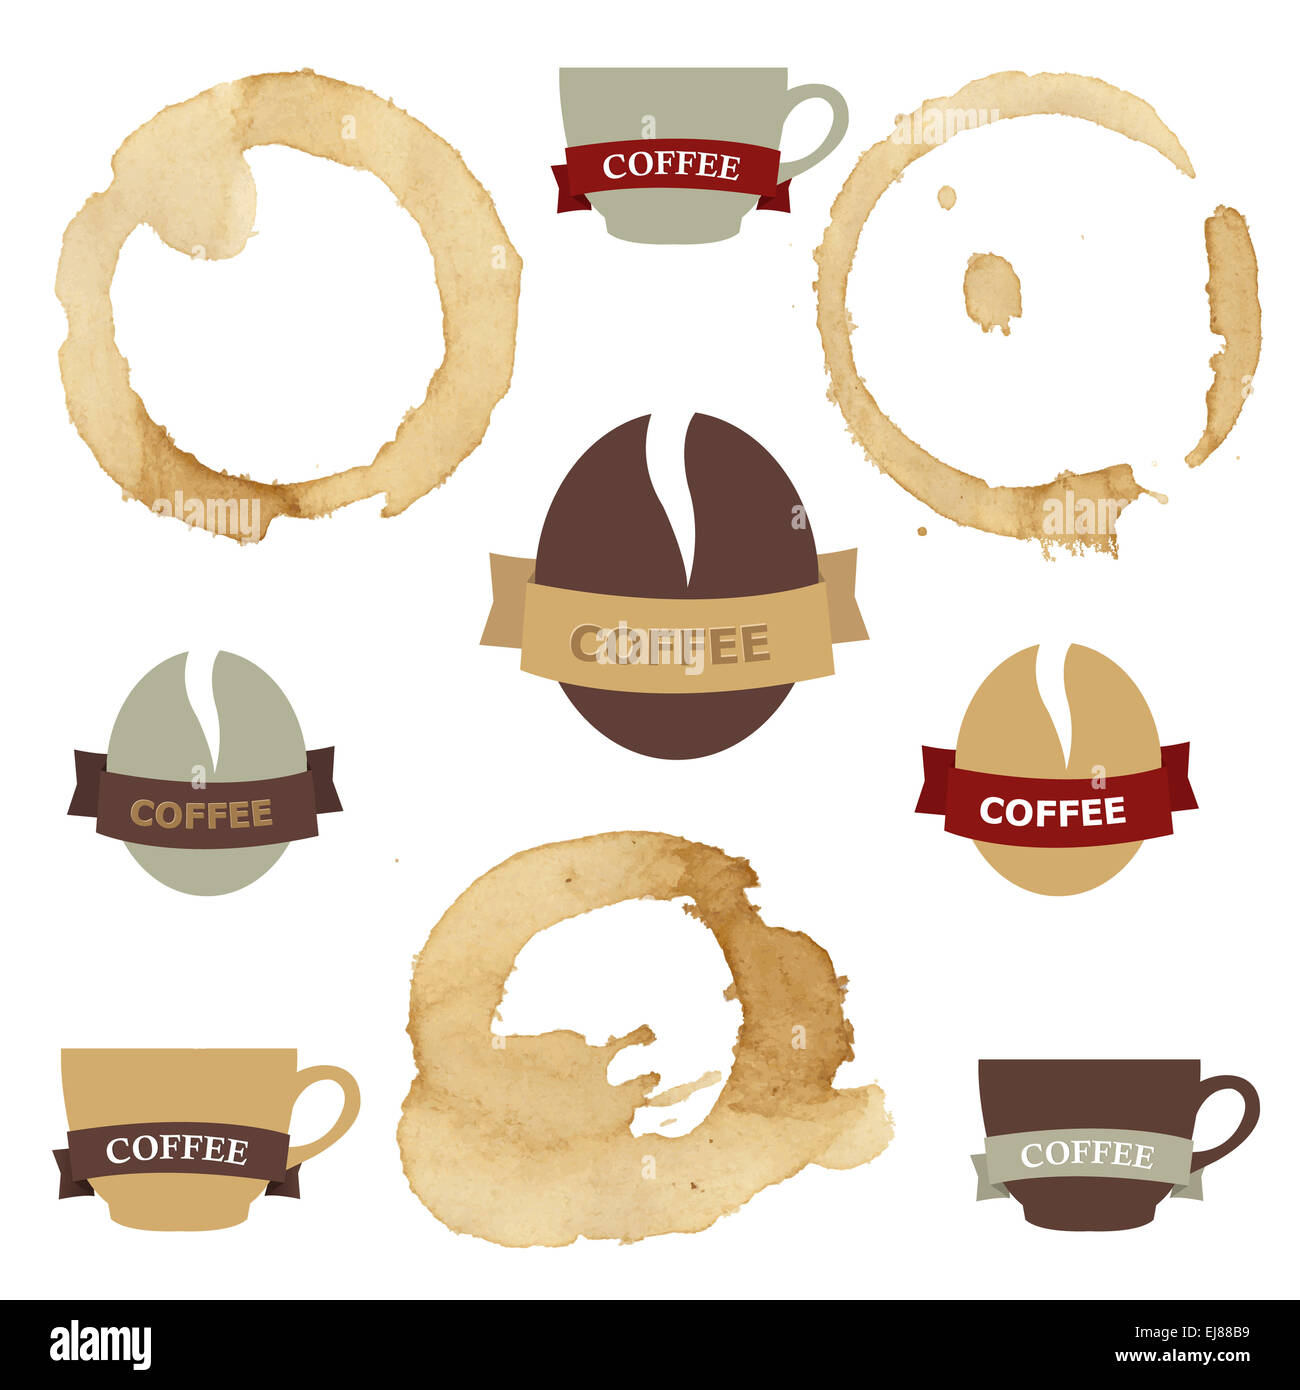 Coffee Stains With Symbols Set Stock Photo